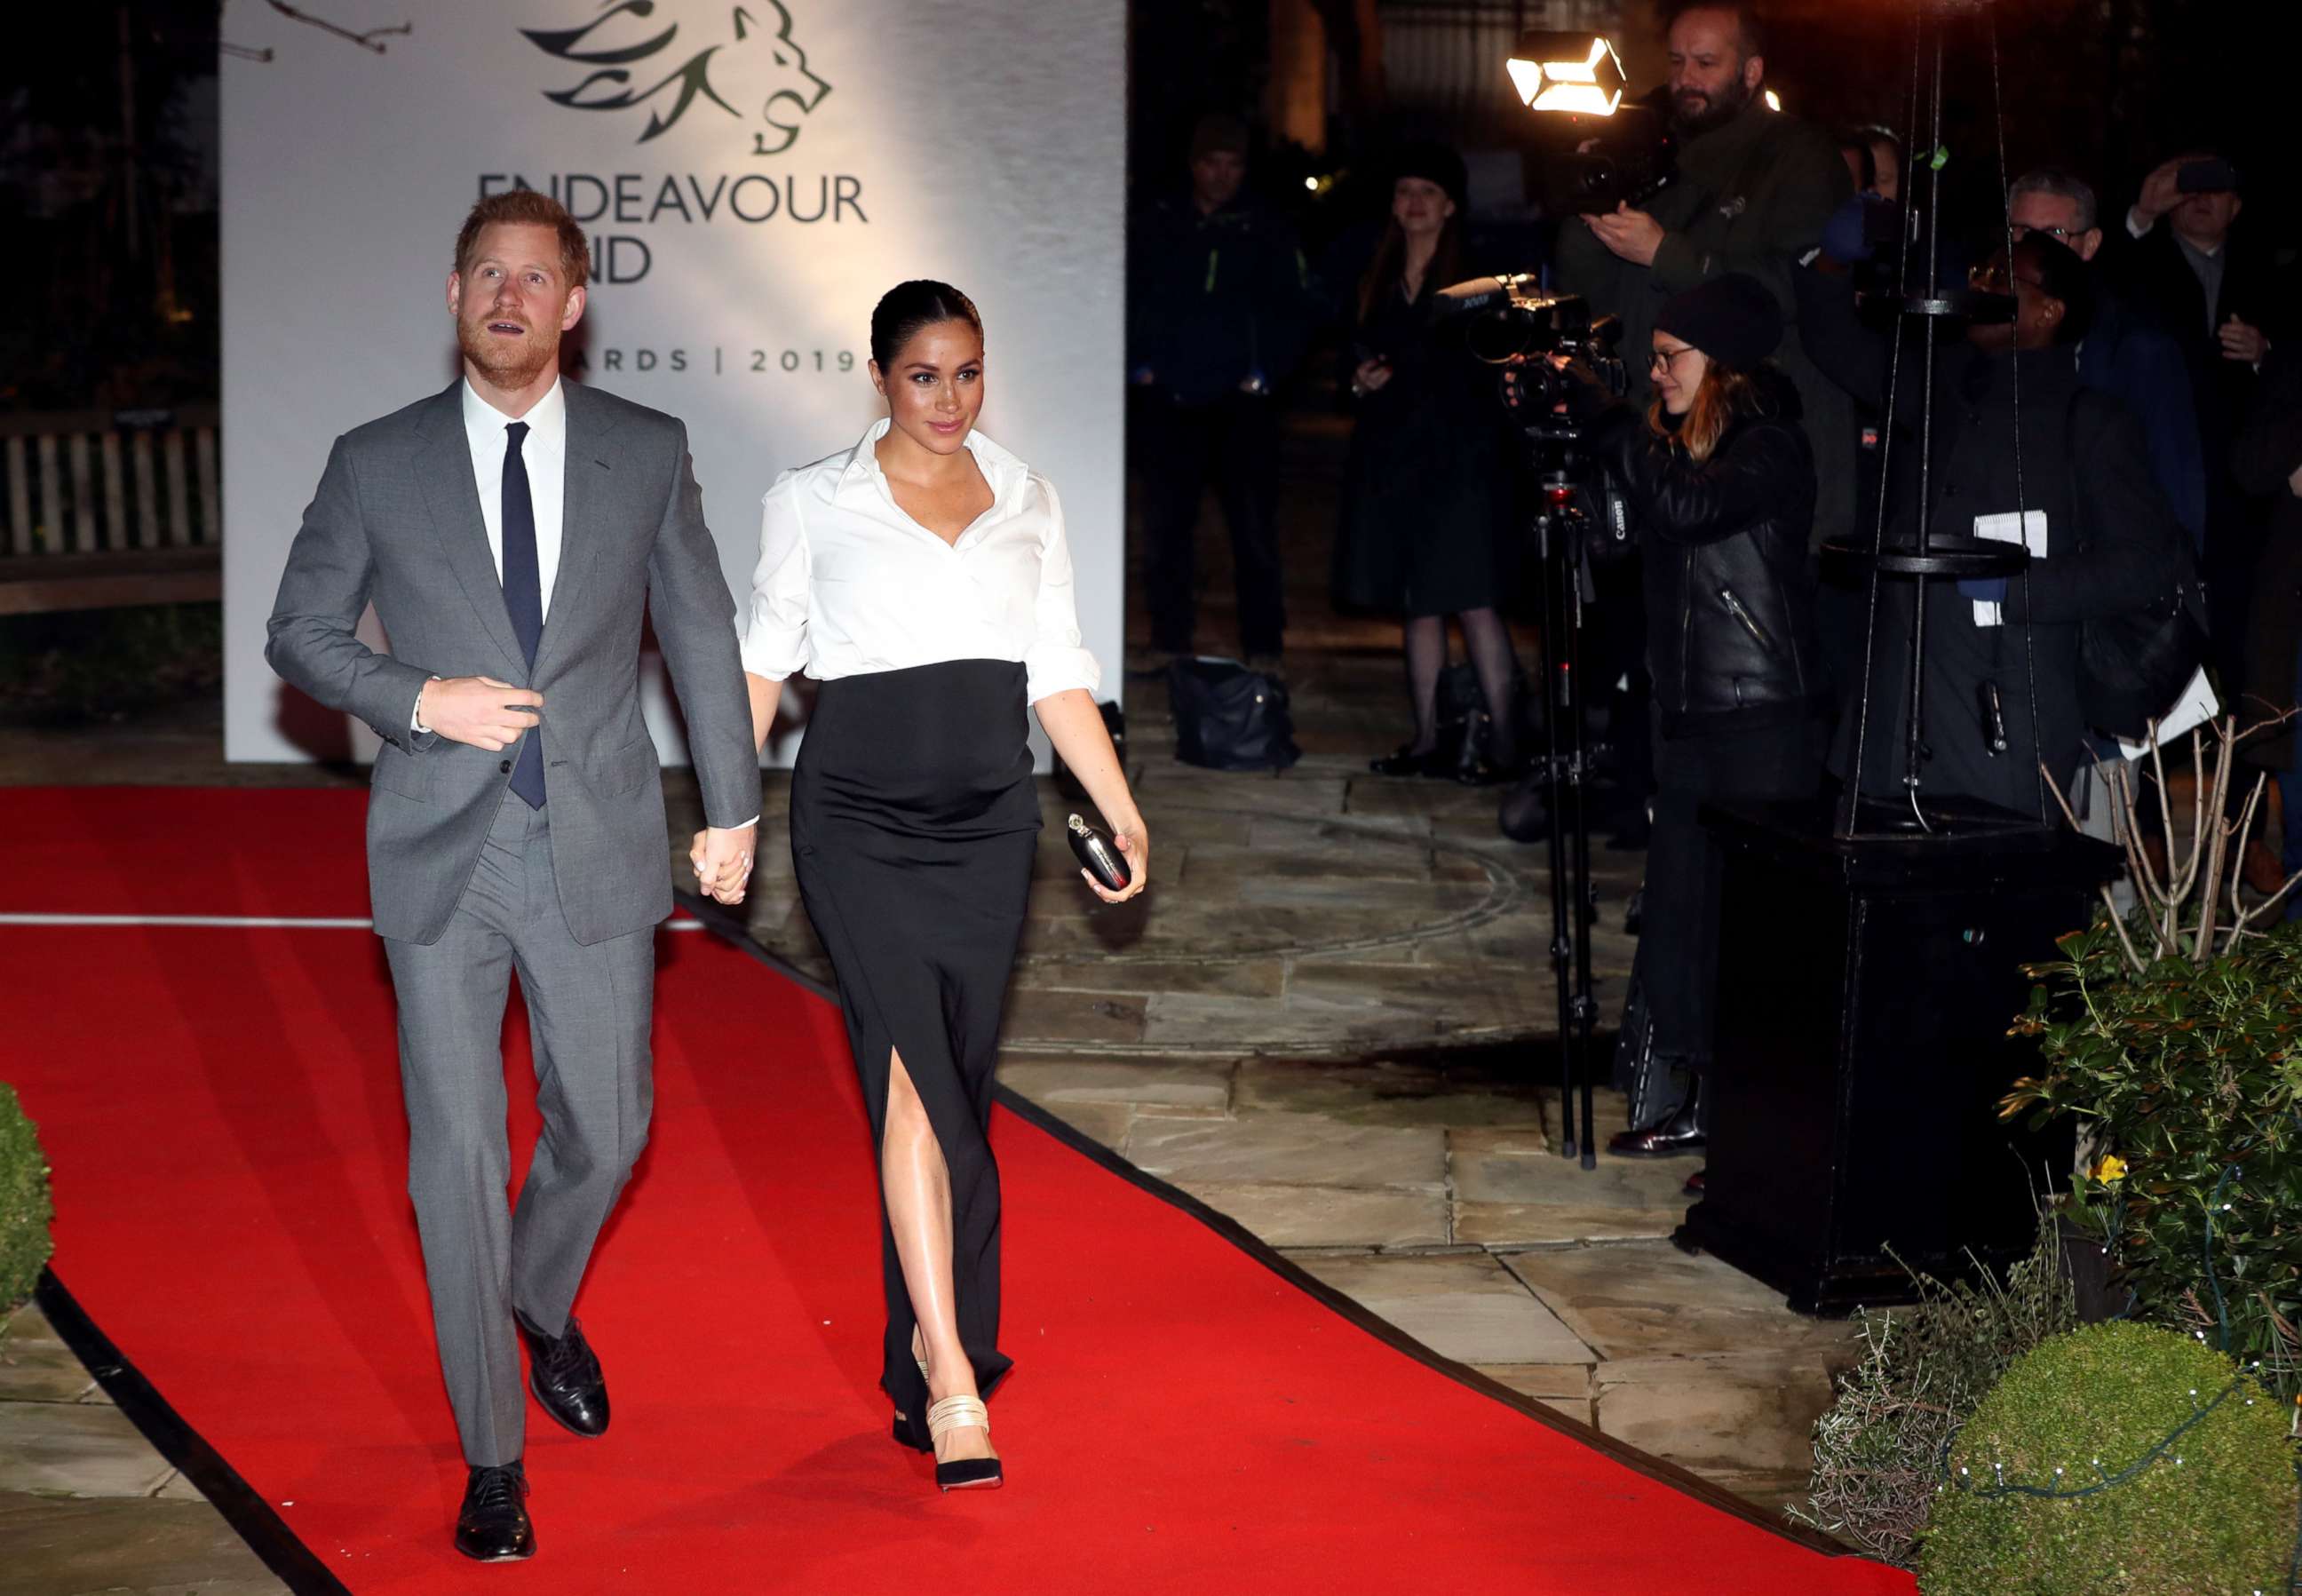 PHOTO: Britain's Prince Harry and Meghan, Duchess of Sussex, arrive at the Endeavour Fund Awards in the Drapers' Hall in London, Feb. 7, 2019.